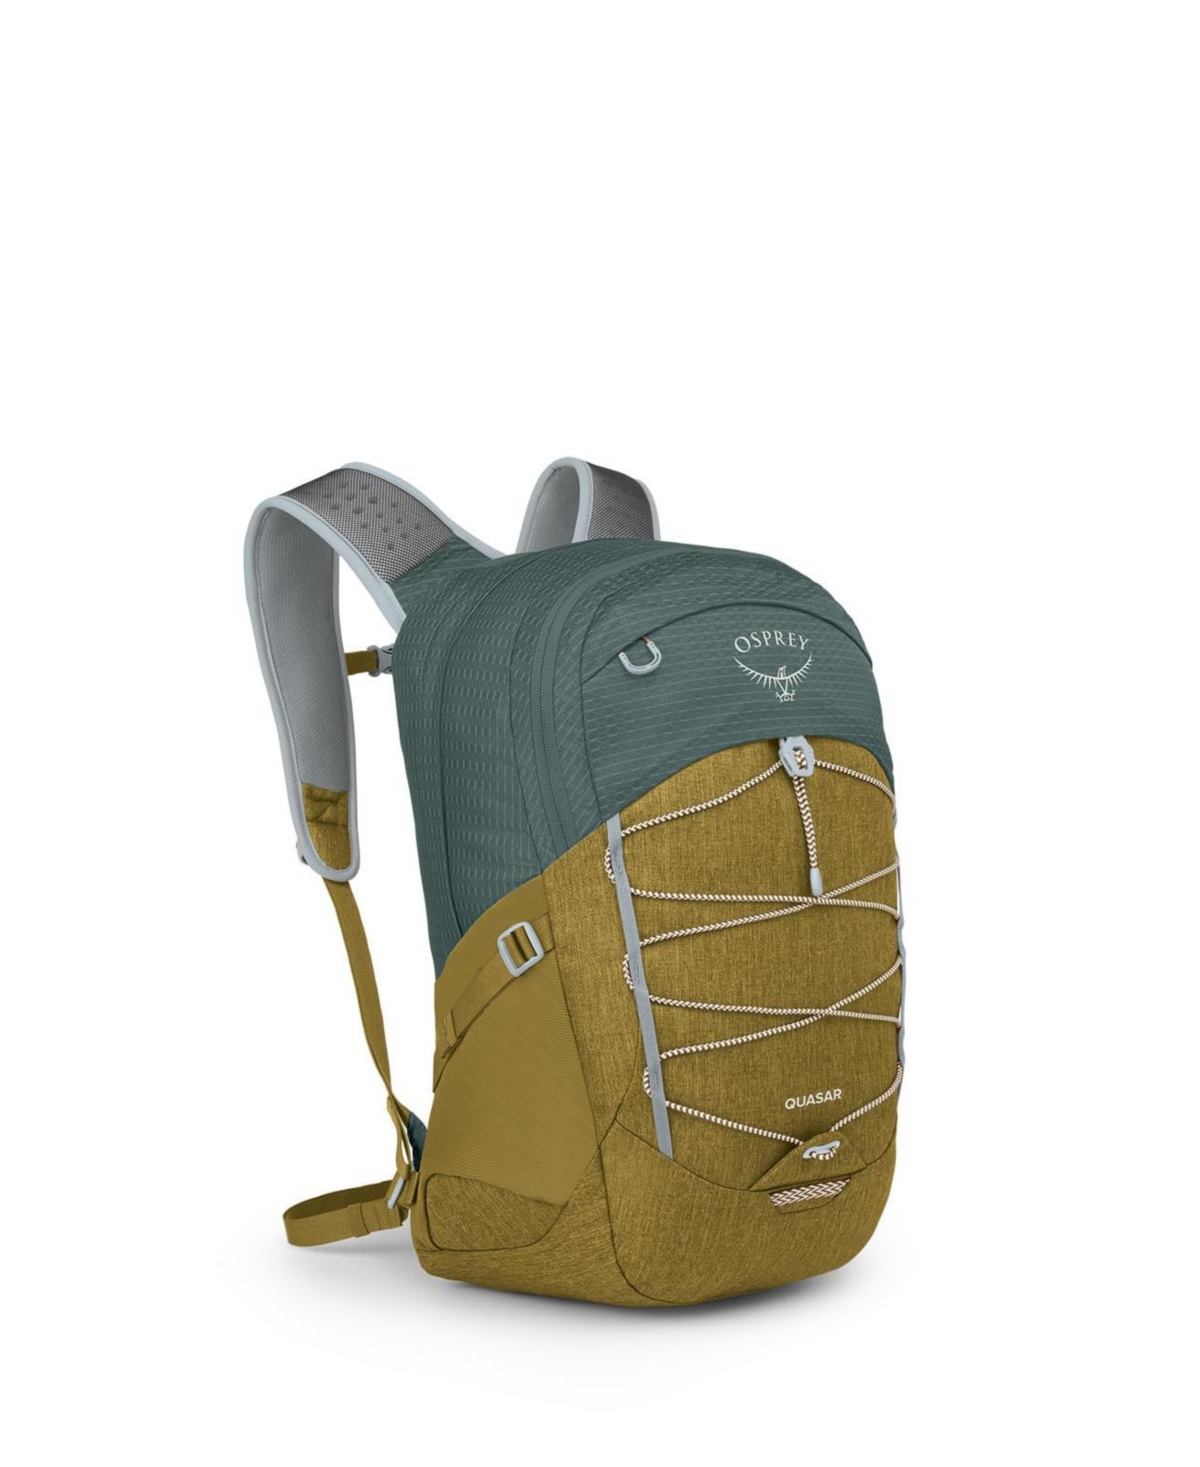 Quasar Men's Laptop Backpack - Green tunnel/brindle brown